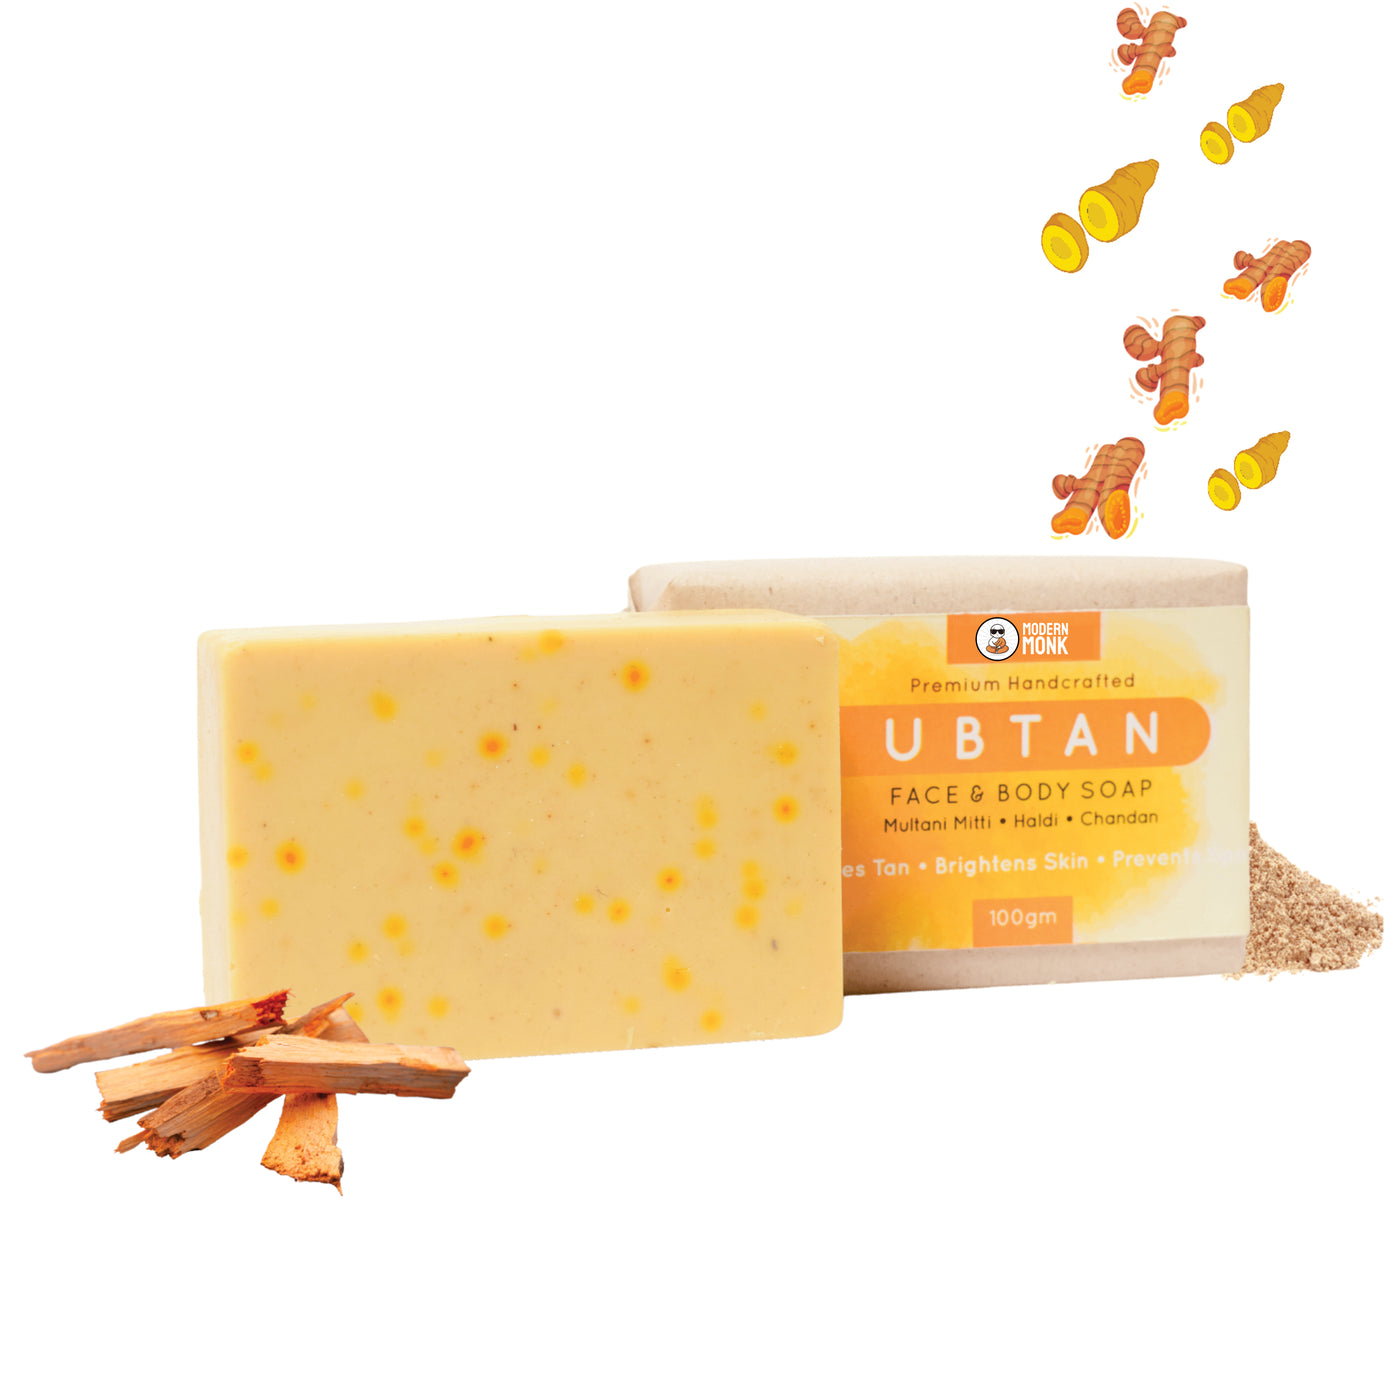 Ubtan Face and Body Soap (100gm)